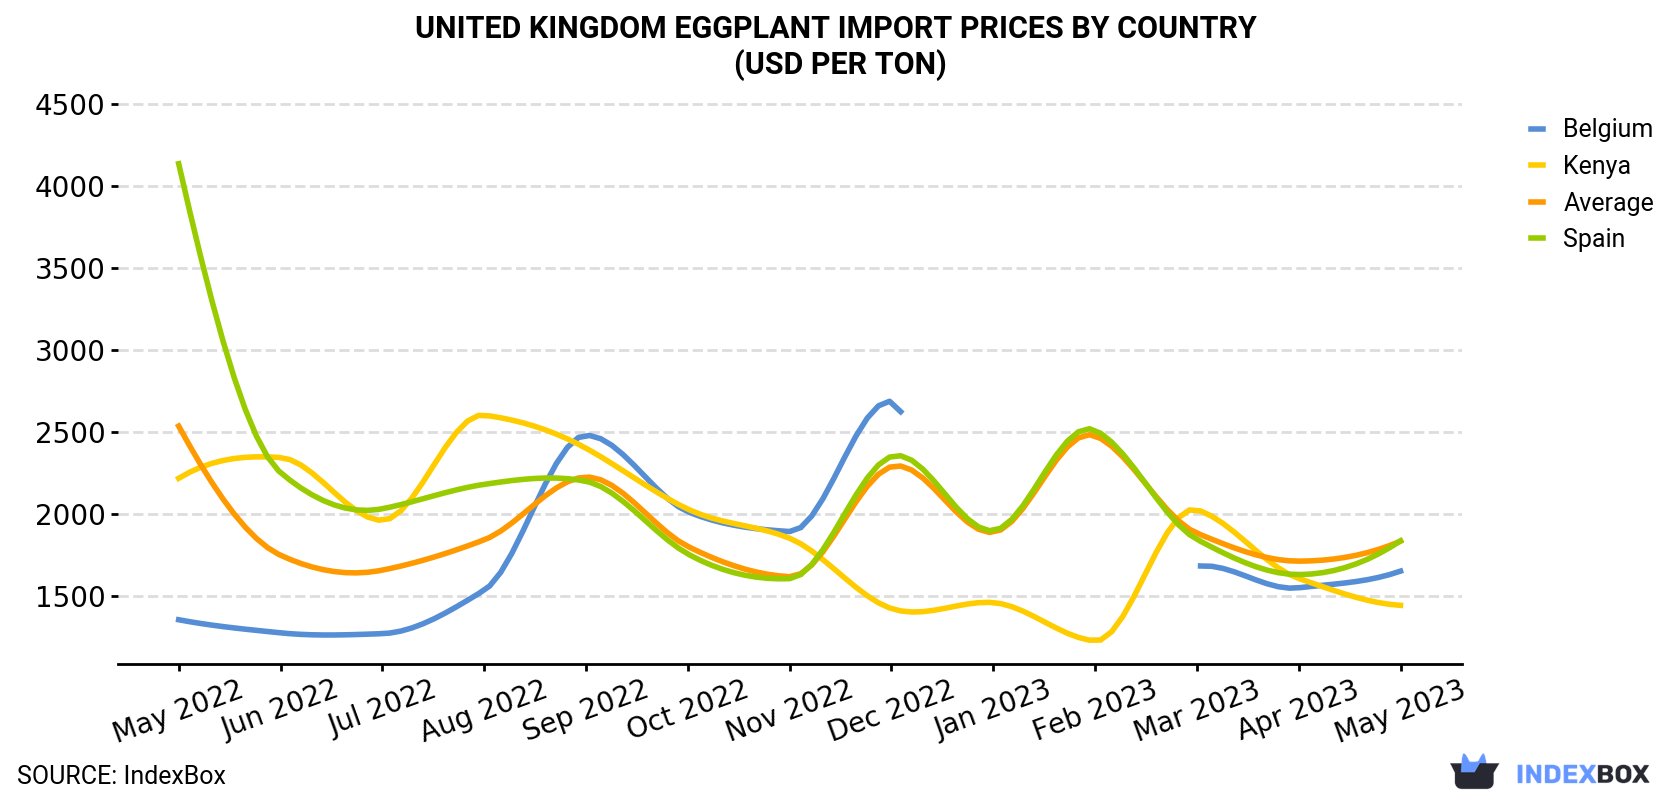 United Kingdom Eggplant Import Prices By Country (USD Per Ton)